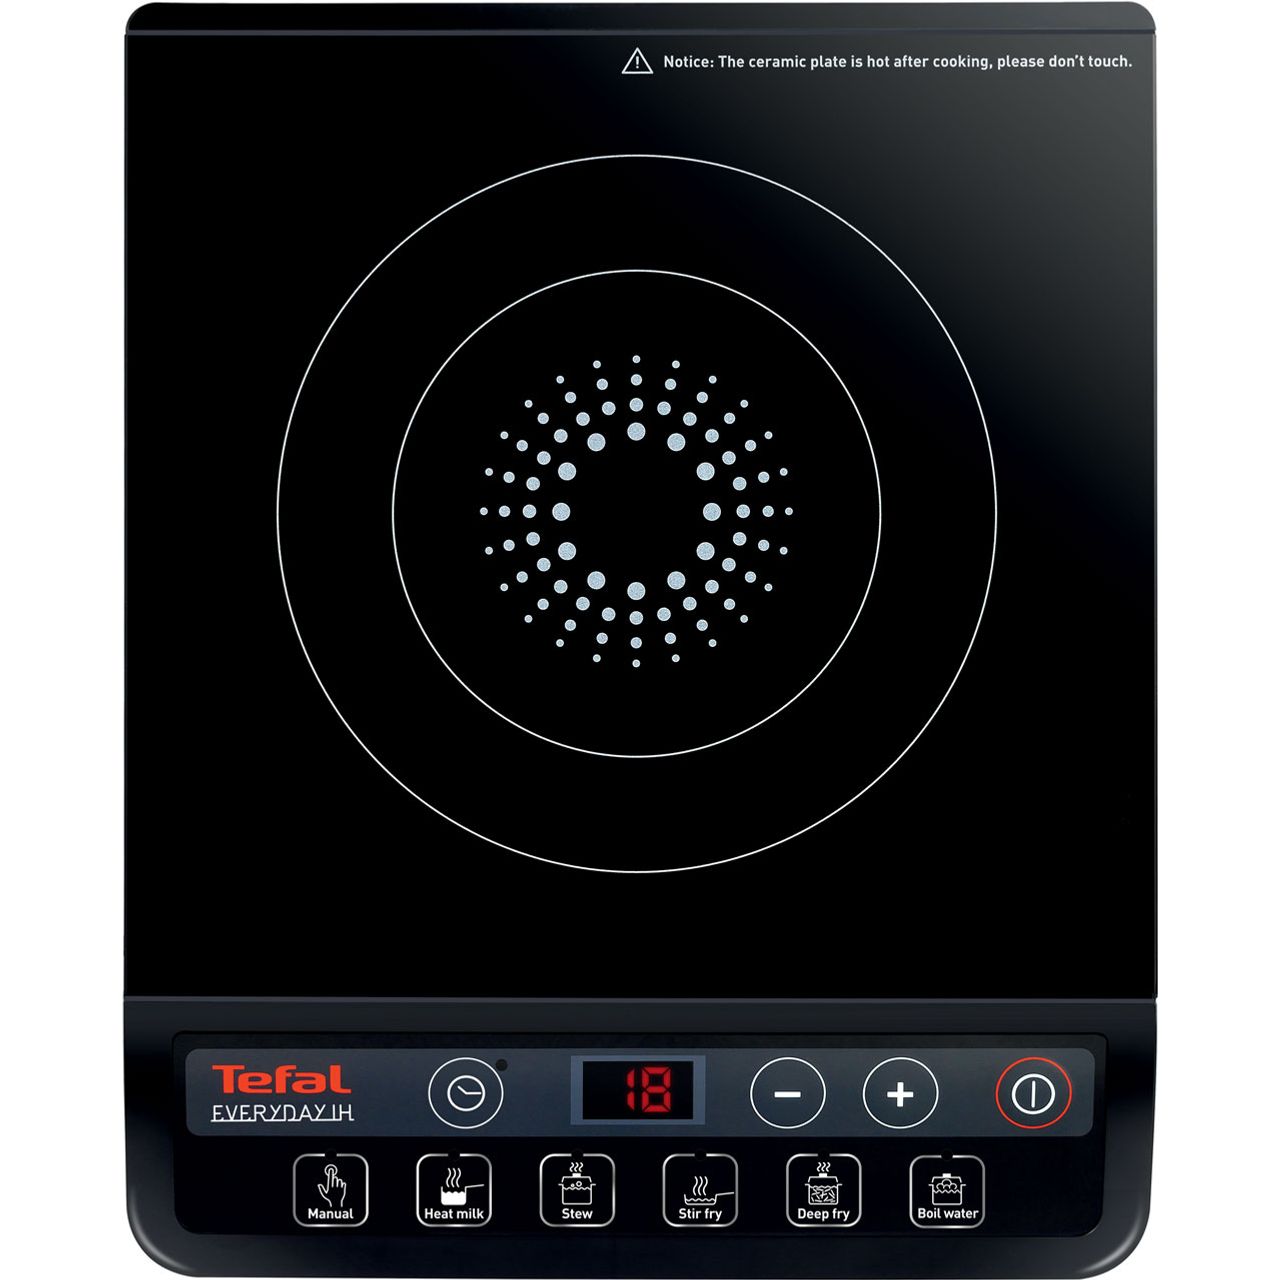 Tefal Everyday IH201840 Mini Induction Hob Review